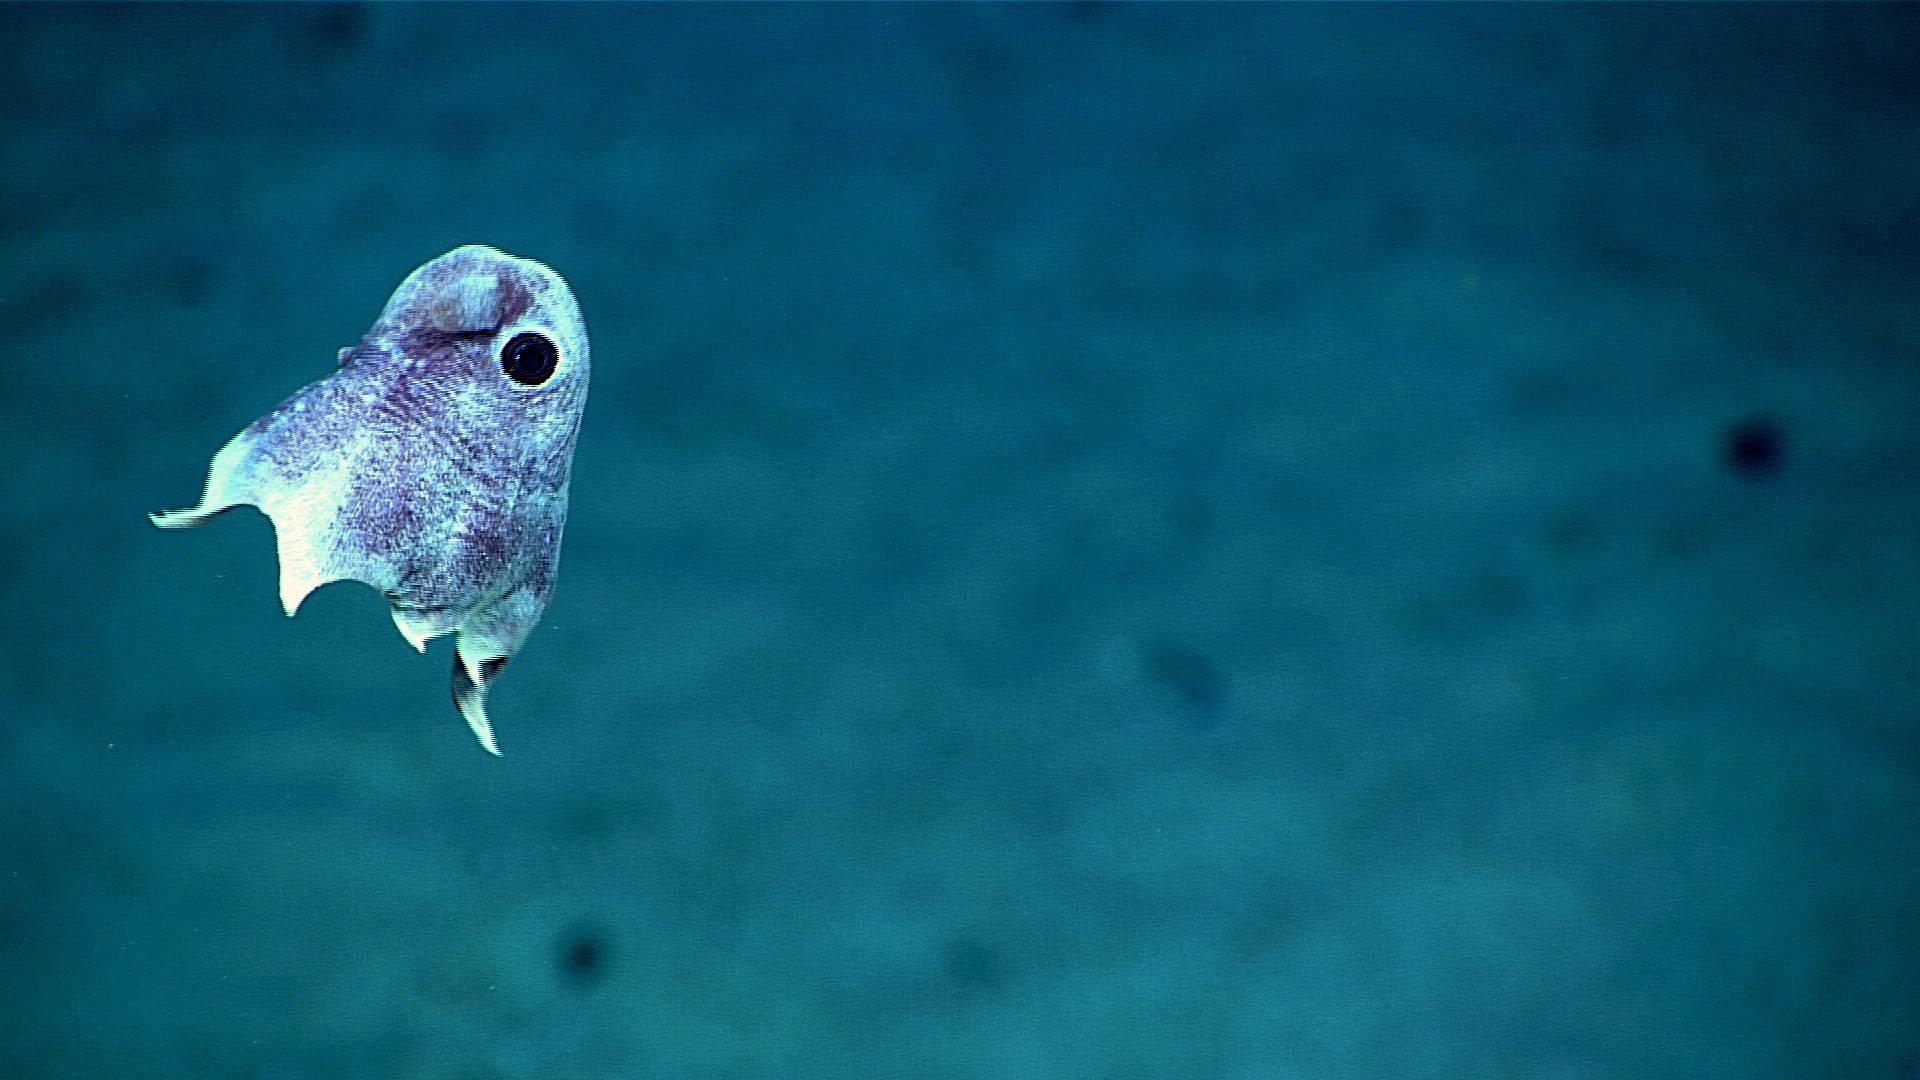 Scientists just captured stunning images of deep sea creatures - YouTube